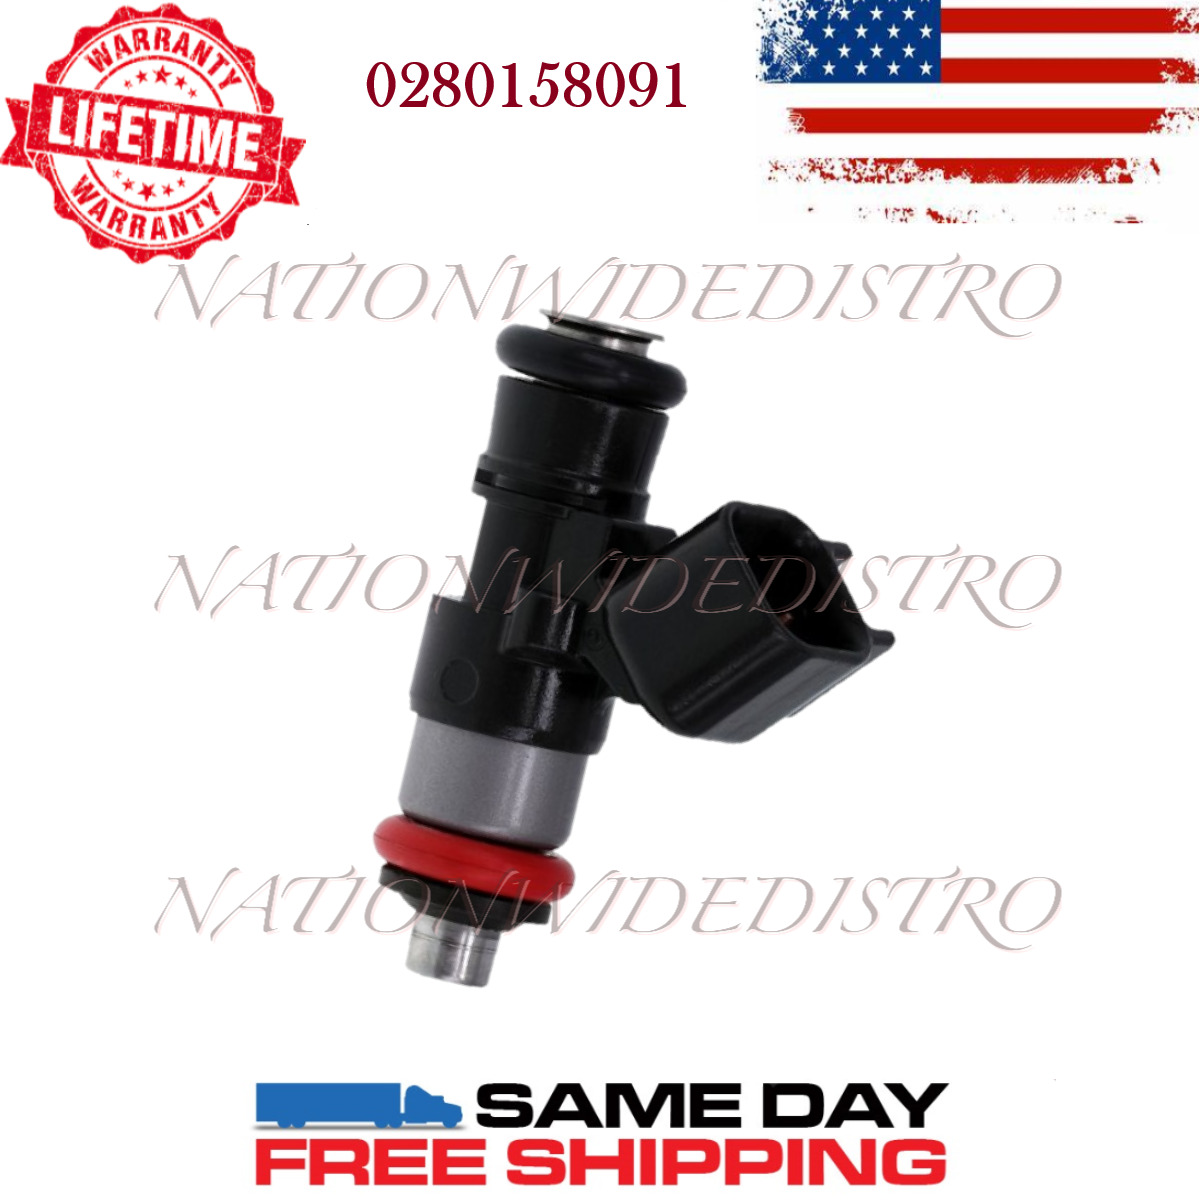 1x OEM Bosch Fuel Injector for 2007-2012 Lincoln MKZ 3.5L V6 0280158091